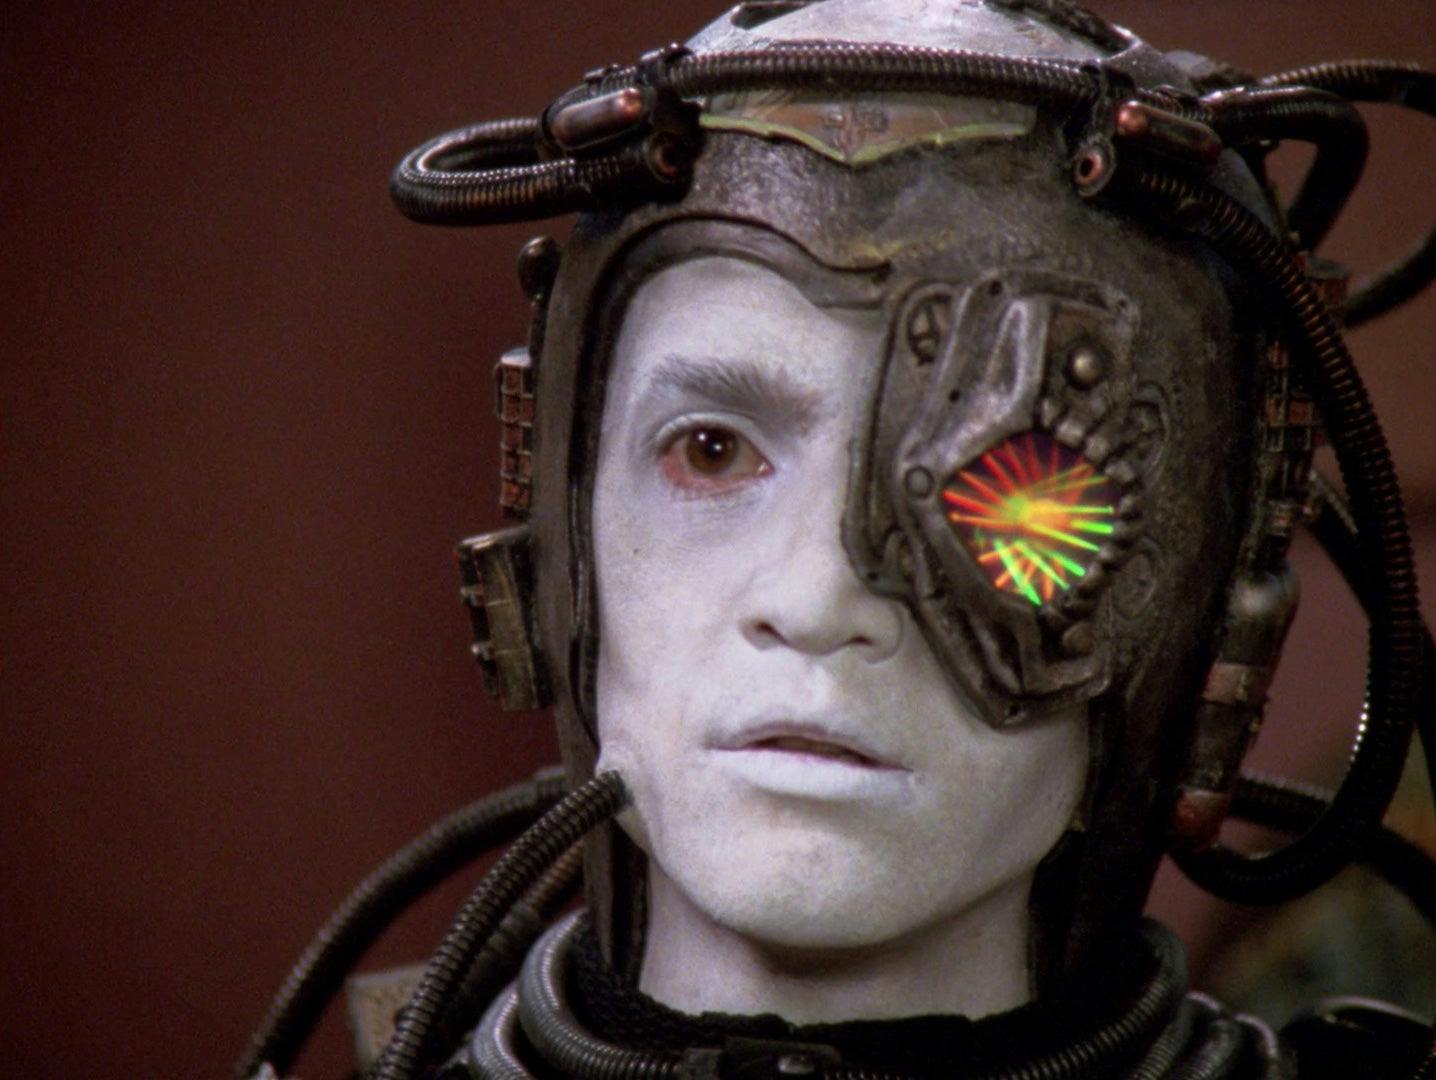 A close up of Hugh, with Borg implants covering most of the left side of his face.